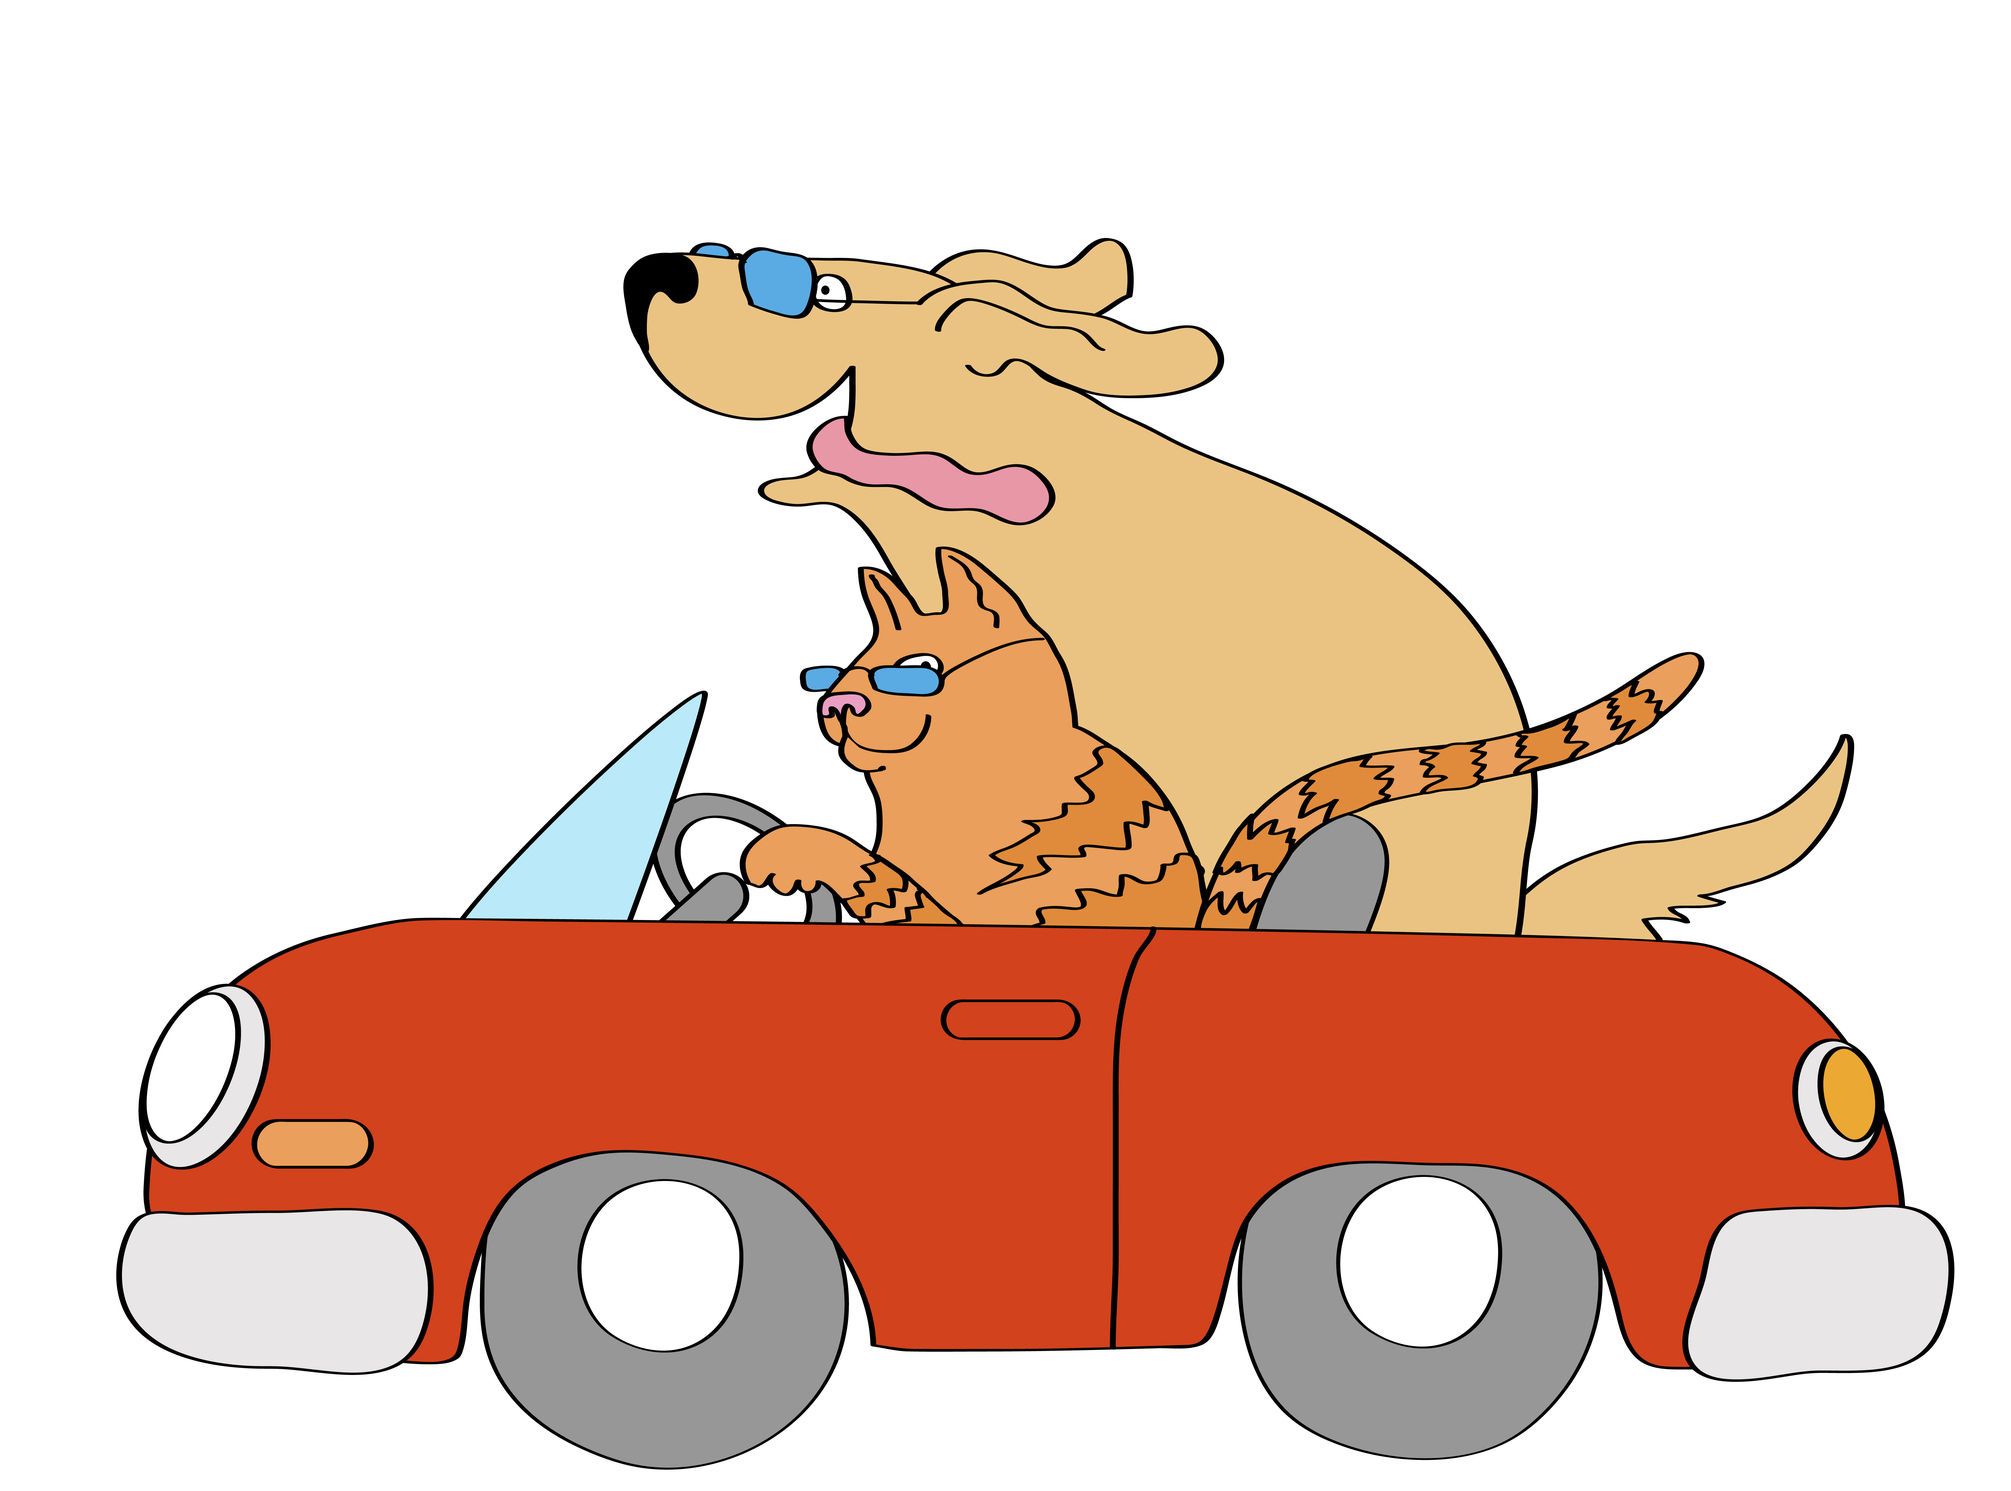 Tips for Pet Safety in the Car